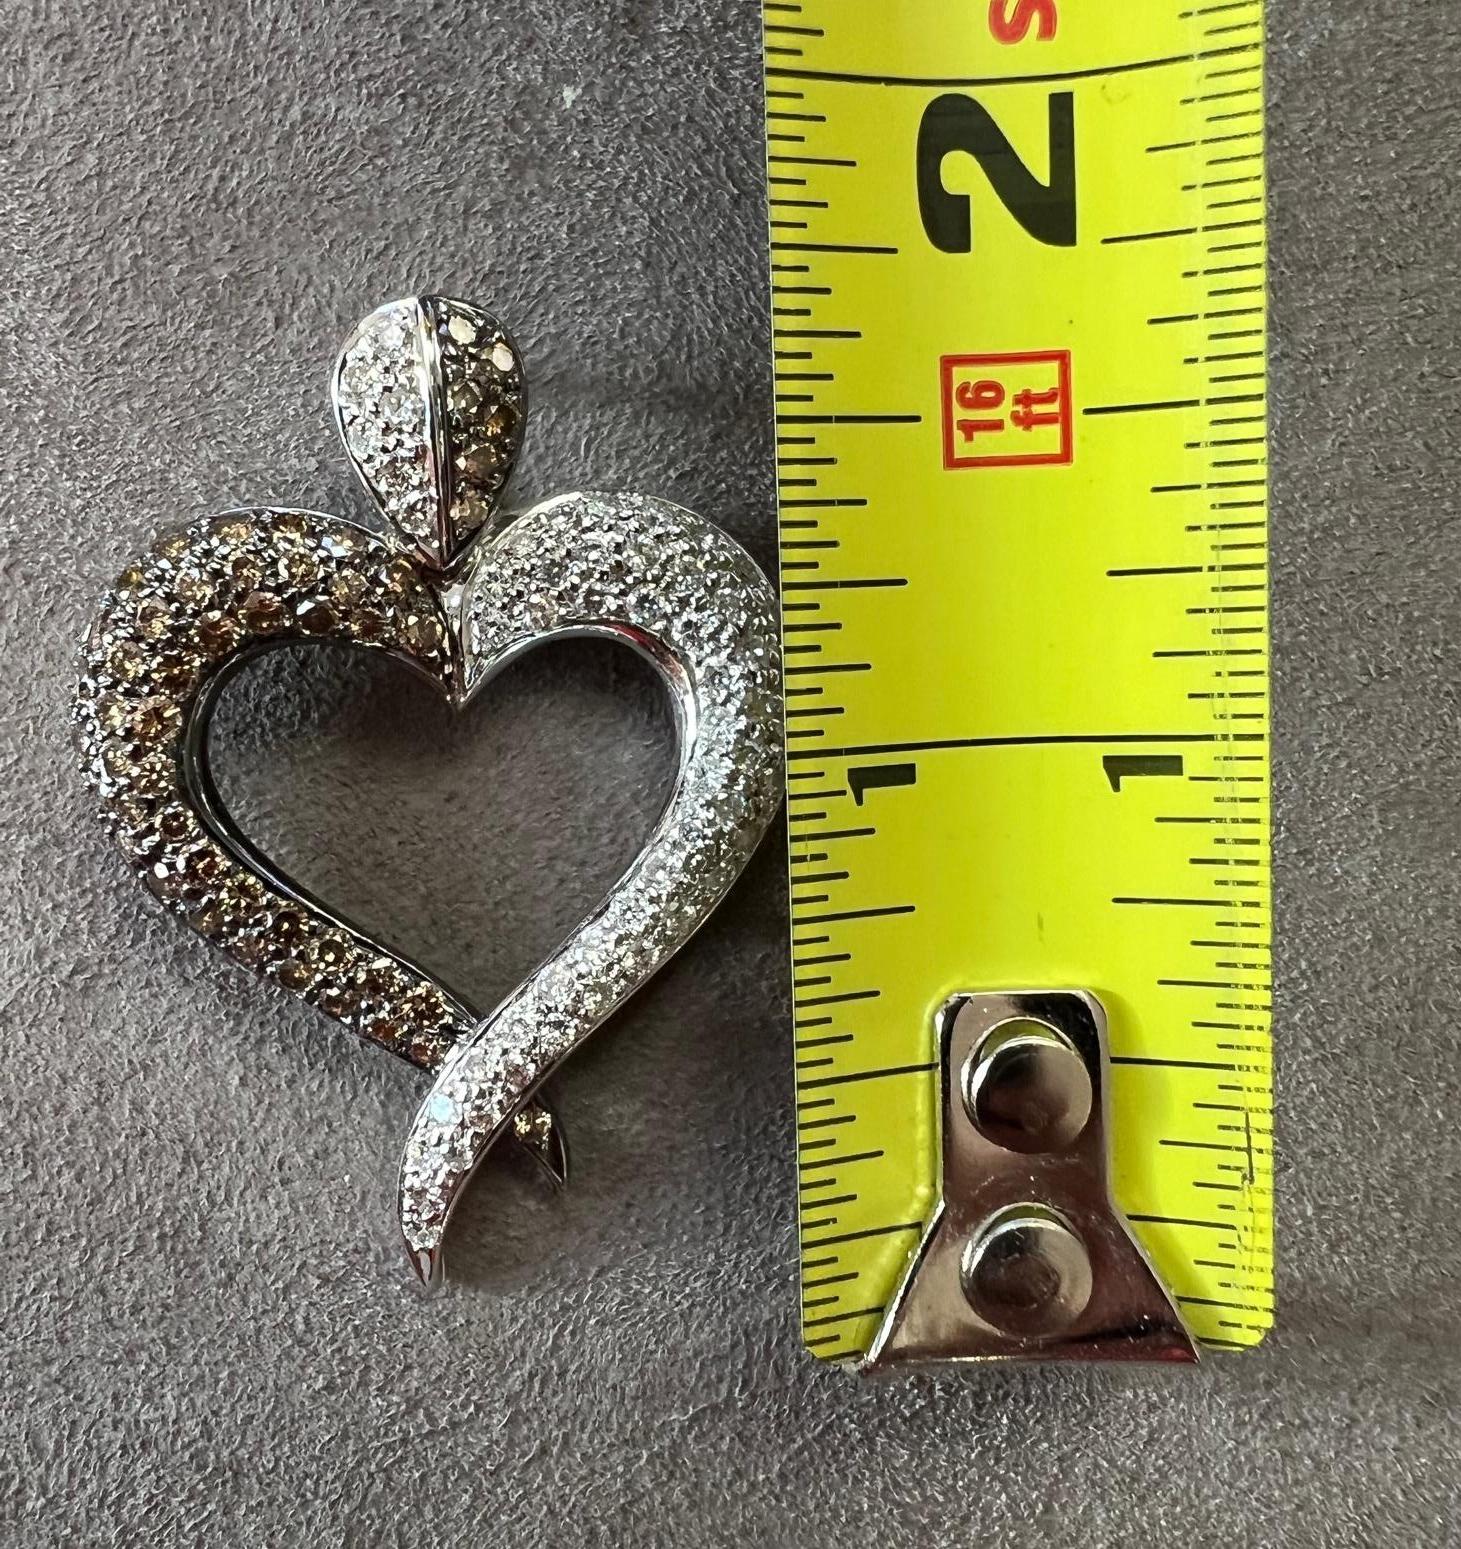 Women's White Gold Heart Shaped White And Cognac Diamond Pendant For Sale